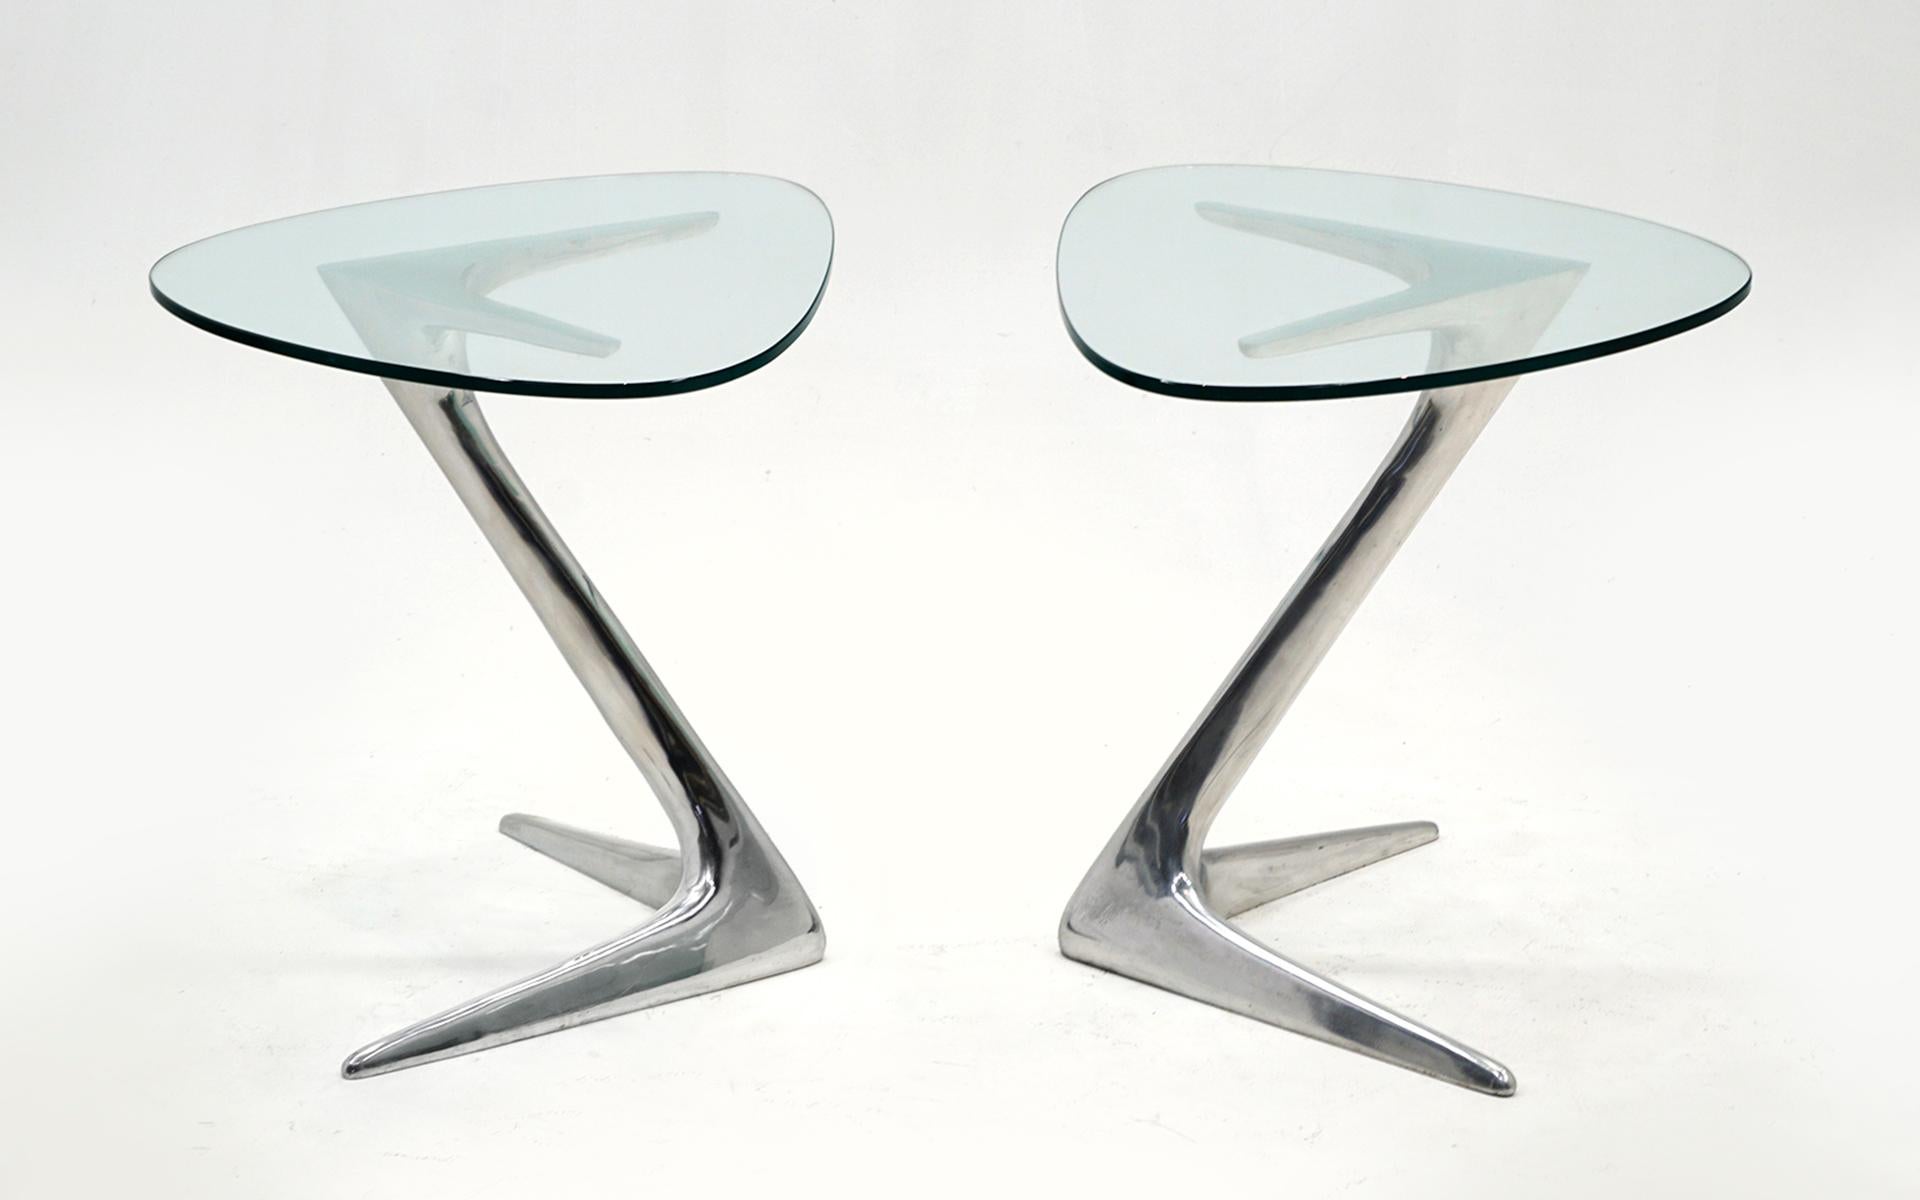 Vladimir Kagan unicorn occasional tables, pair. Vladimir Kagan Designs, Inc. USA, 1959 / circa 1990.
Cast and polished aluminum, glass. Very good condition. Some minor wear and scratches to the aluminum. Only very light scratches to the glass.